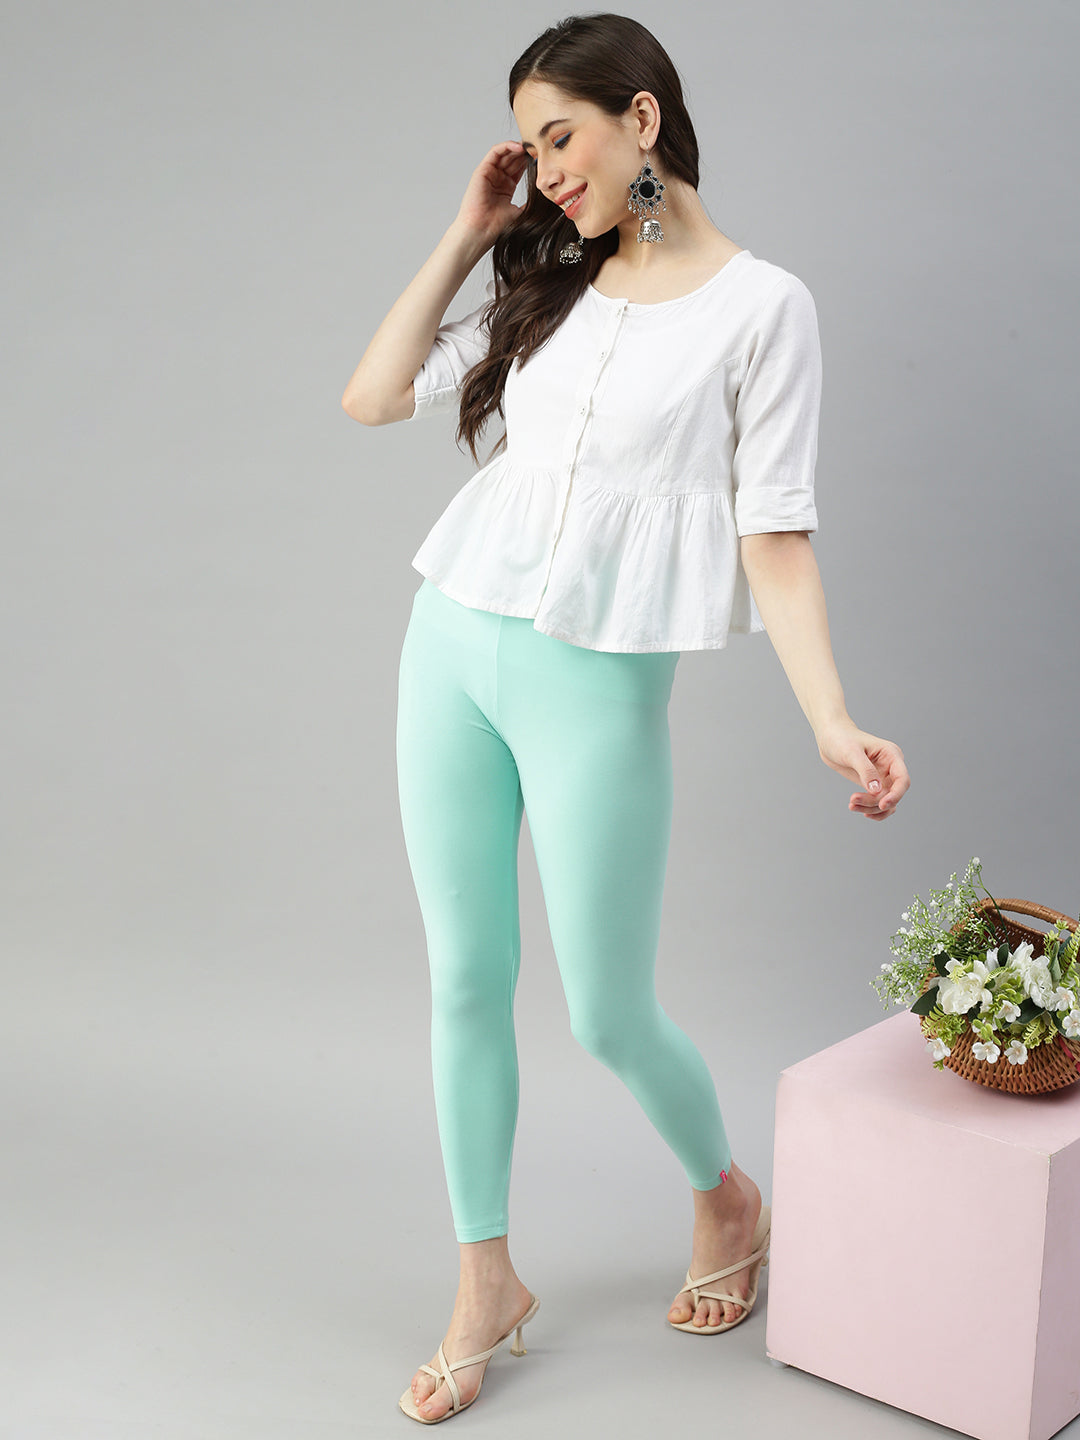 Shop Prisma's Ice Green Ankle Leggings for Ultimate Style